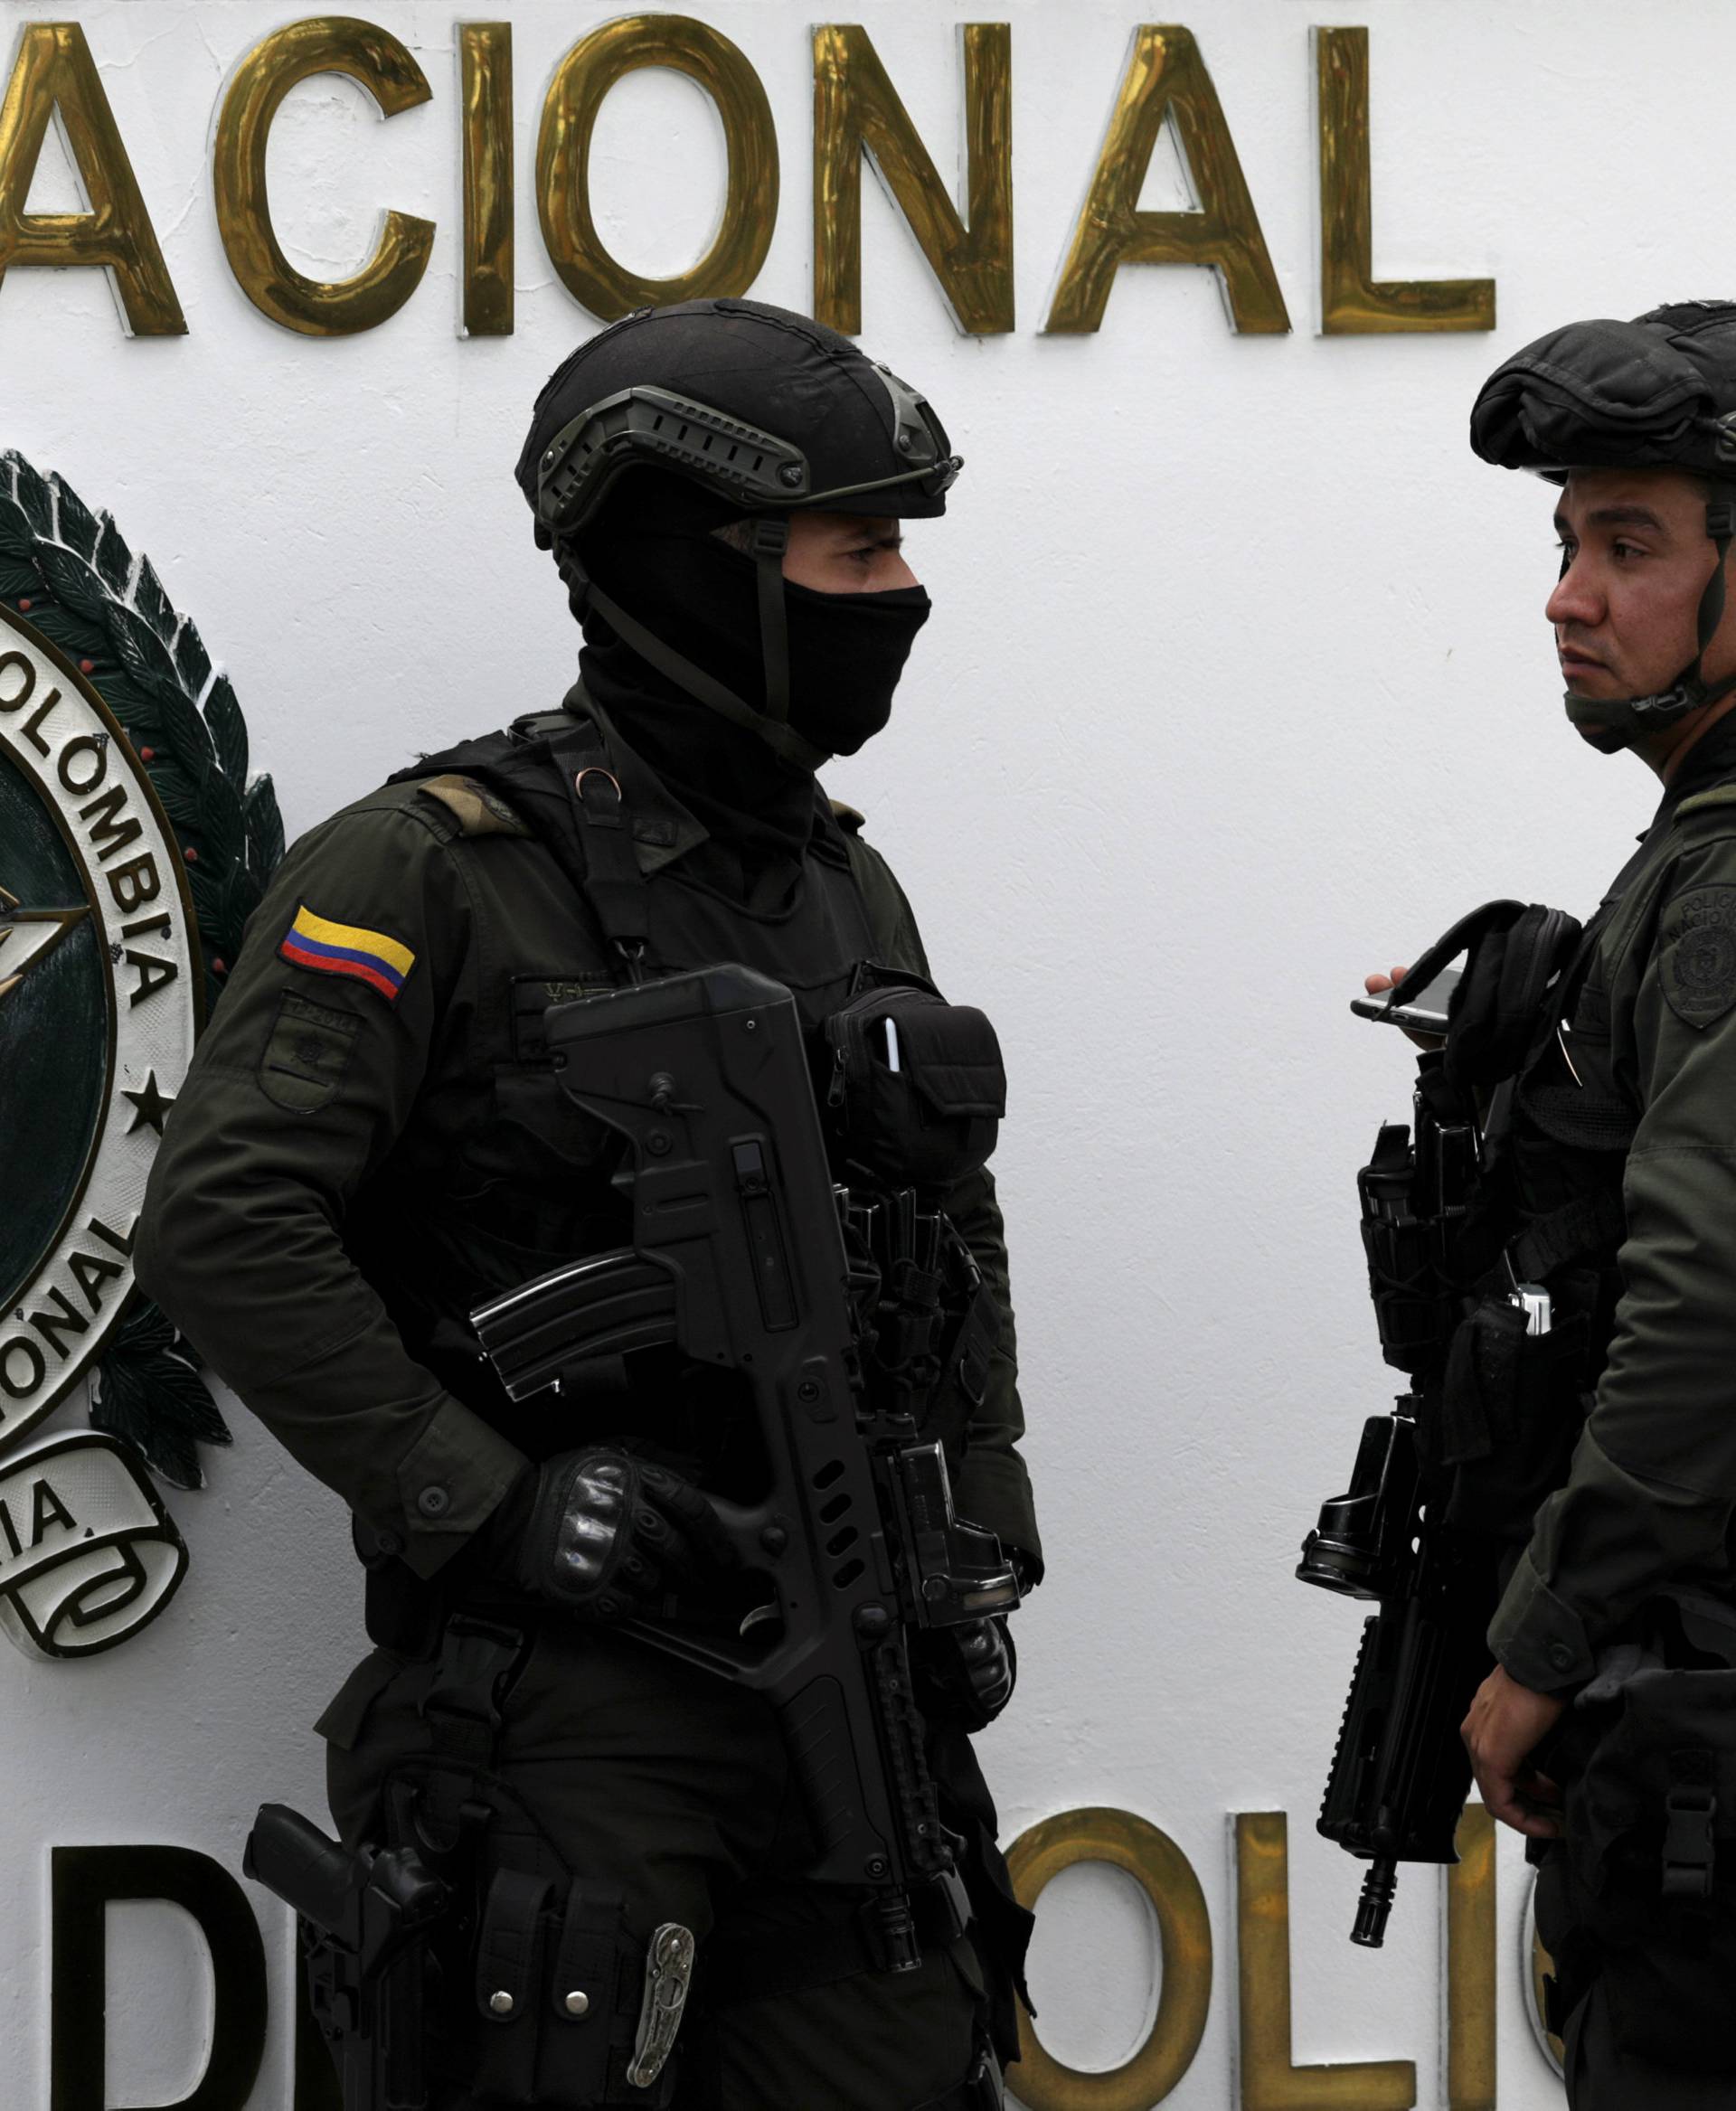 Police work close to the scene where a car bomb exploded, according to authorities, in Bogota